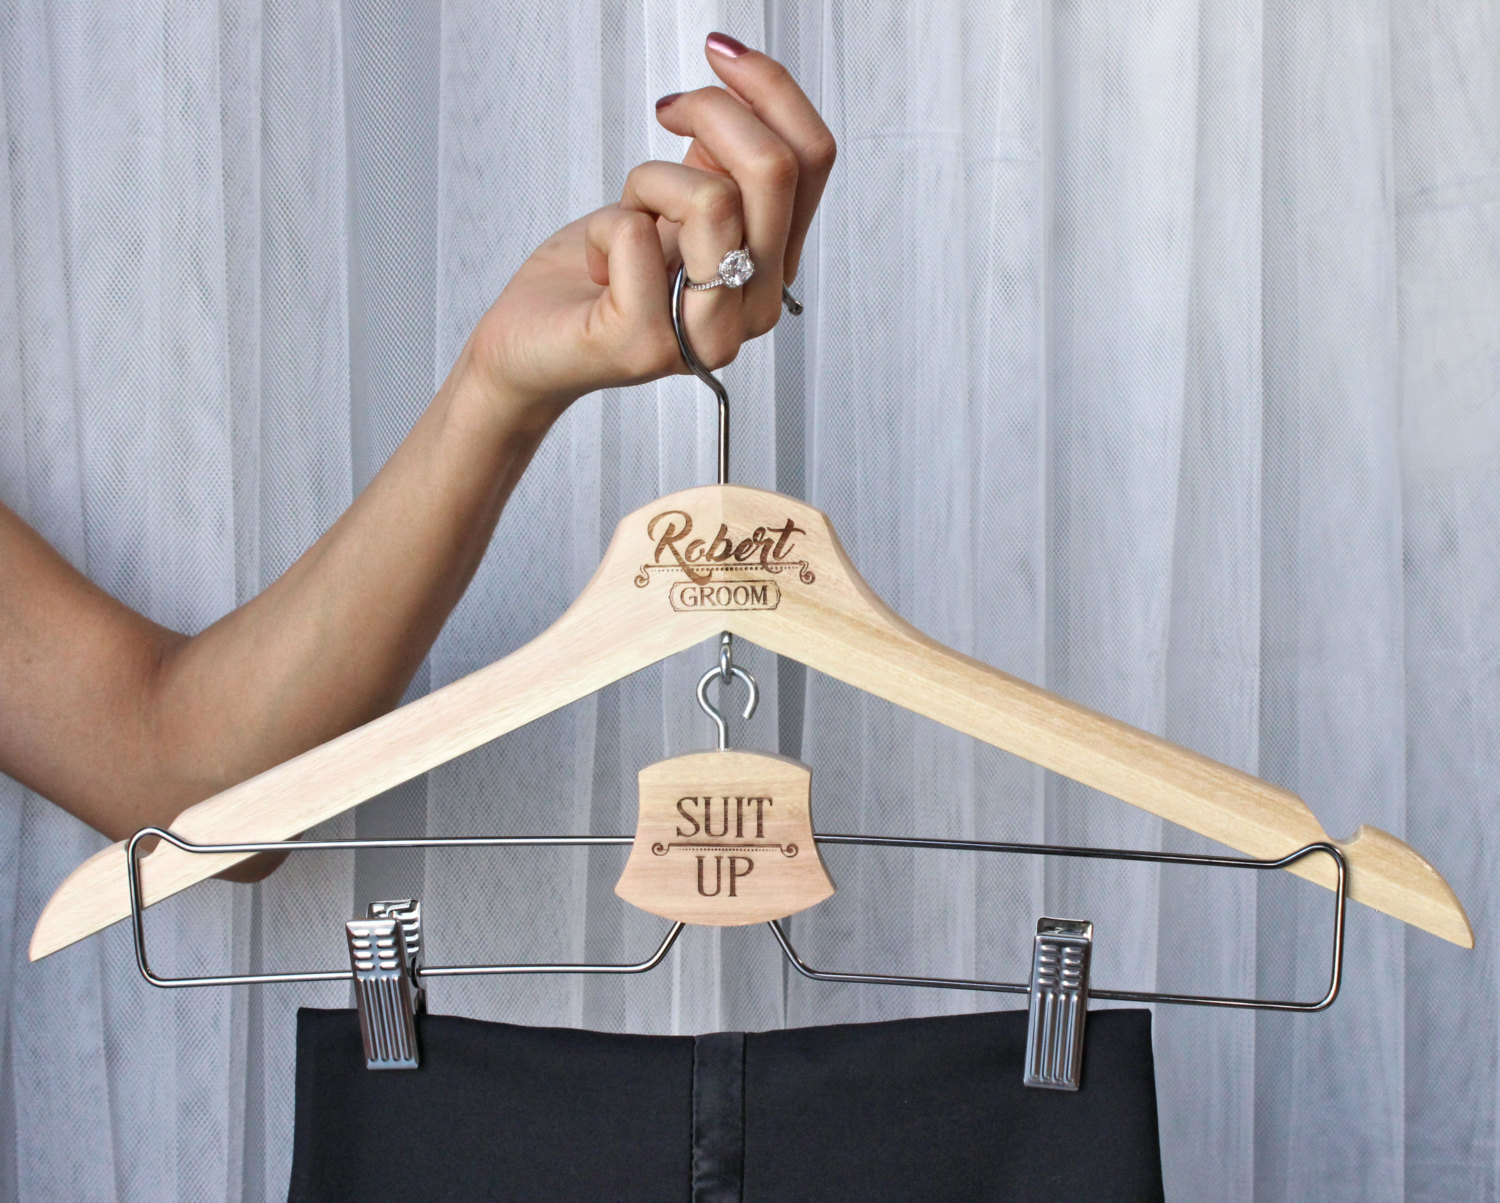 groom hanger personalized | http://etsy.me/2neyW3M